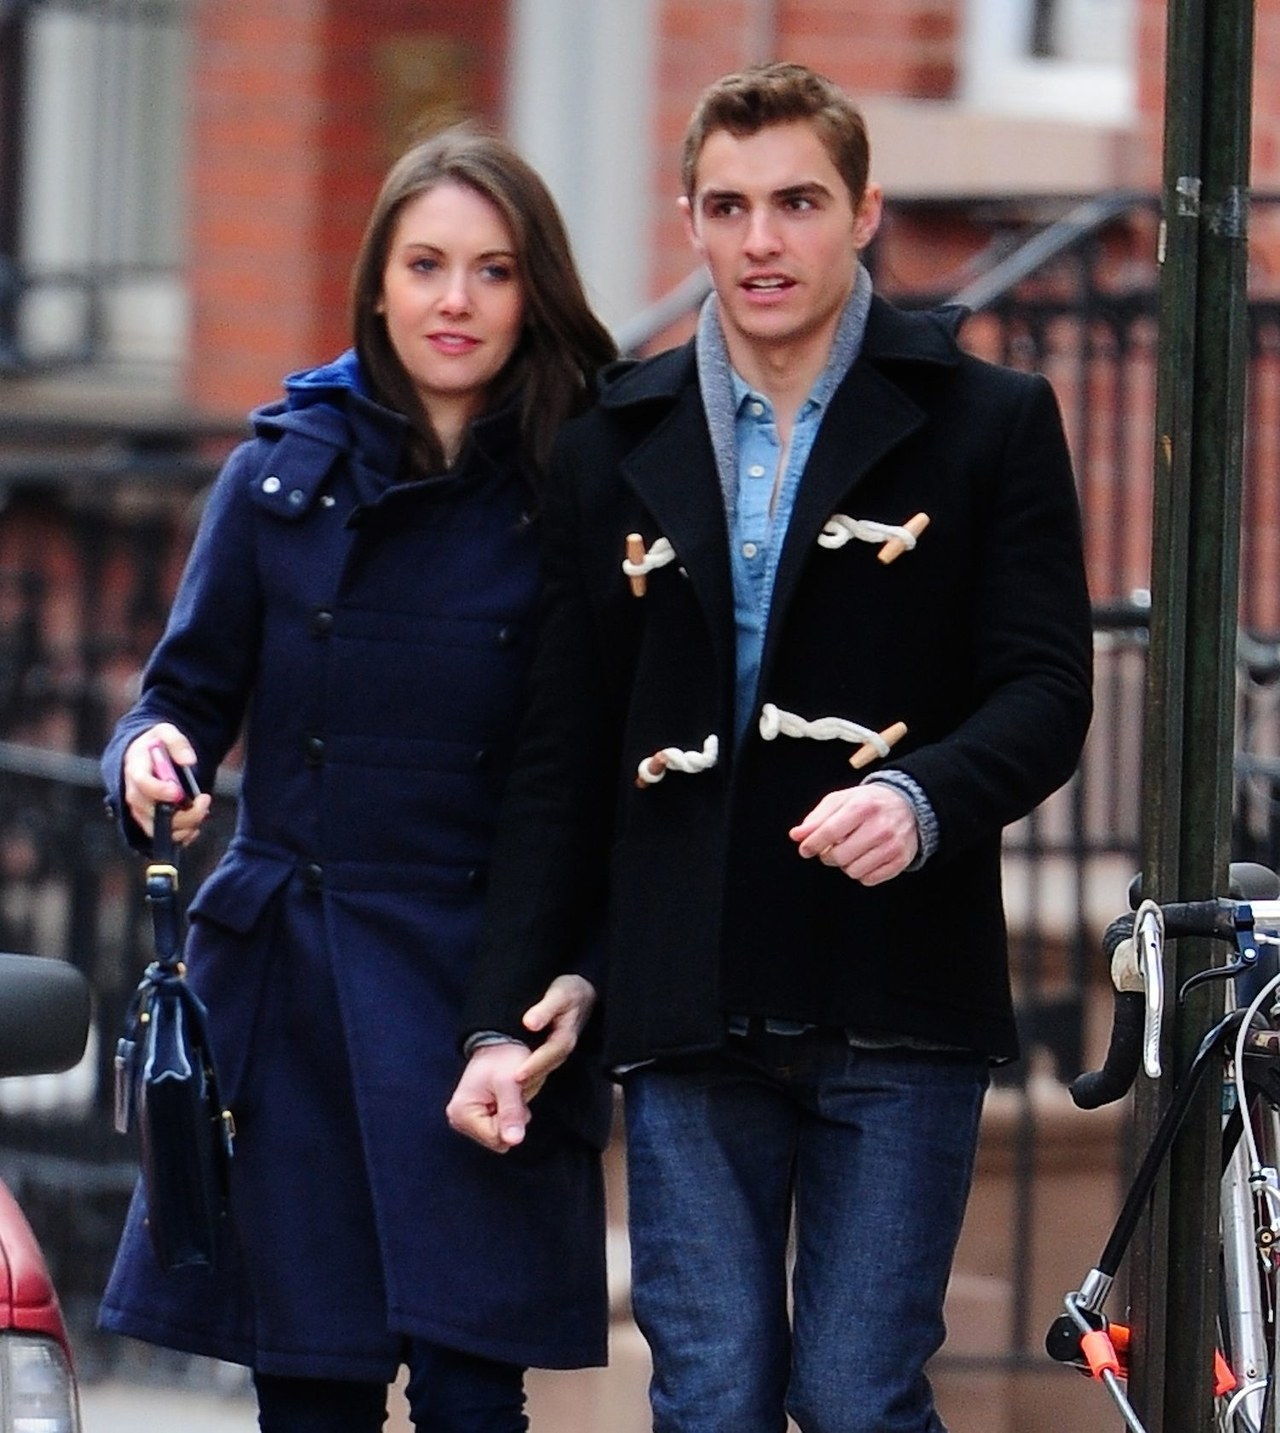 1 alison brie engaged engagement ring dave franco 0825 getty